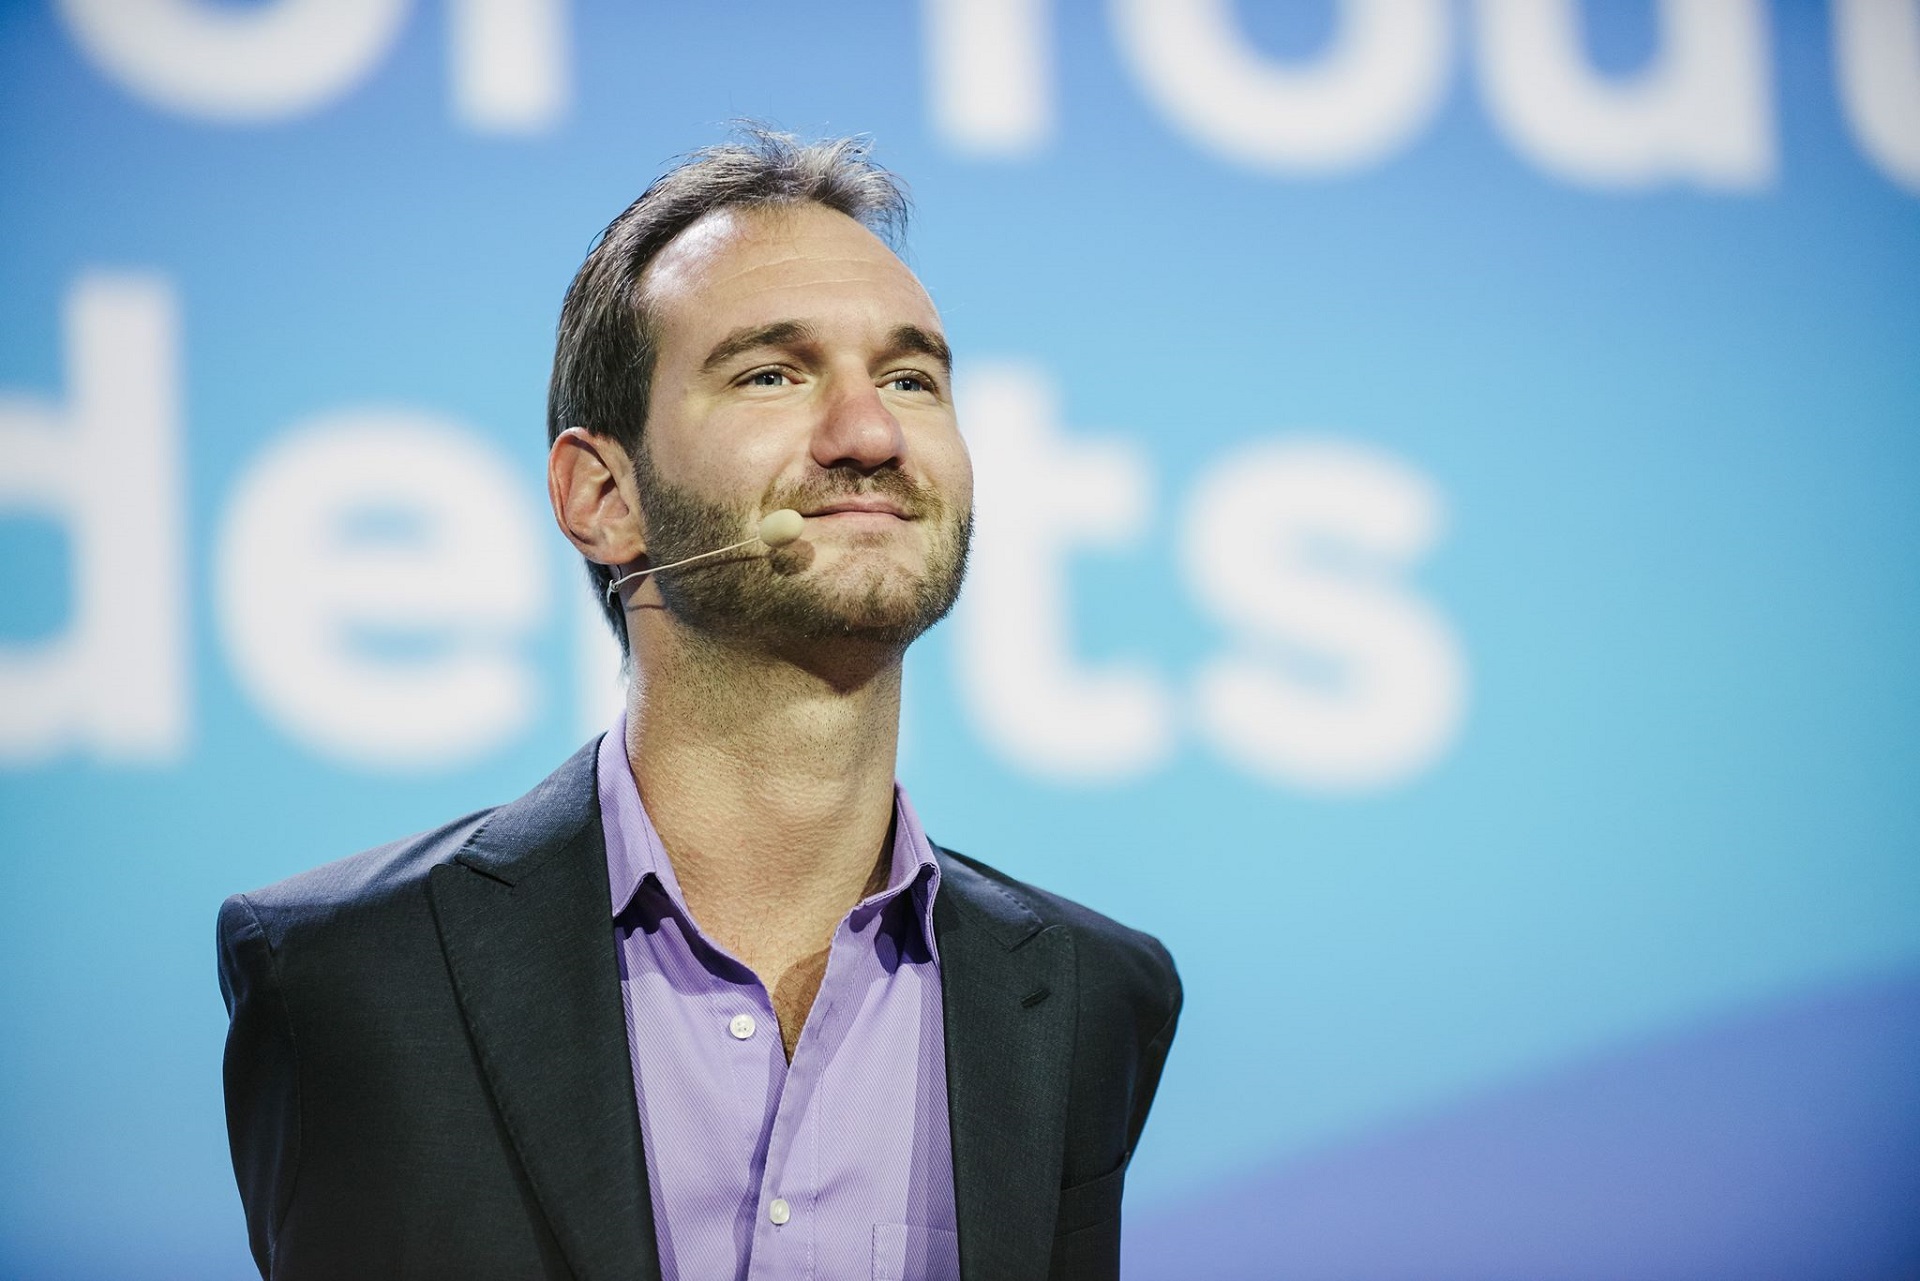 Nick Vujicic Net Worth 2022 – And How He Endeavors A ‘Life Without Limbs’